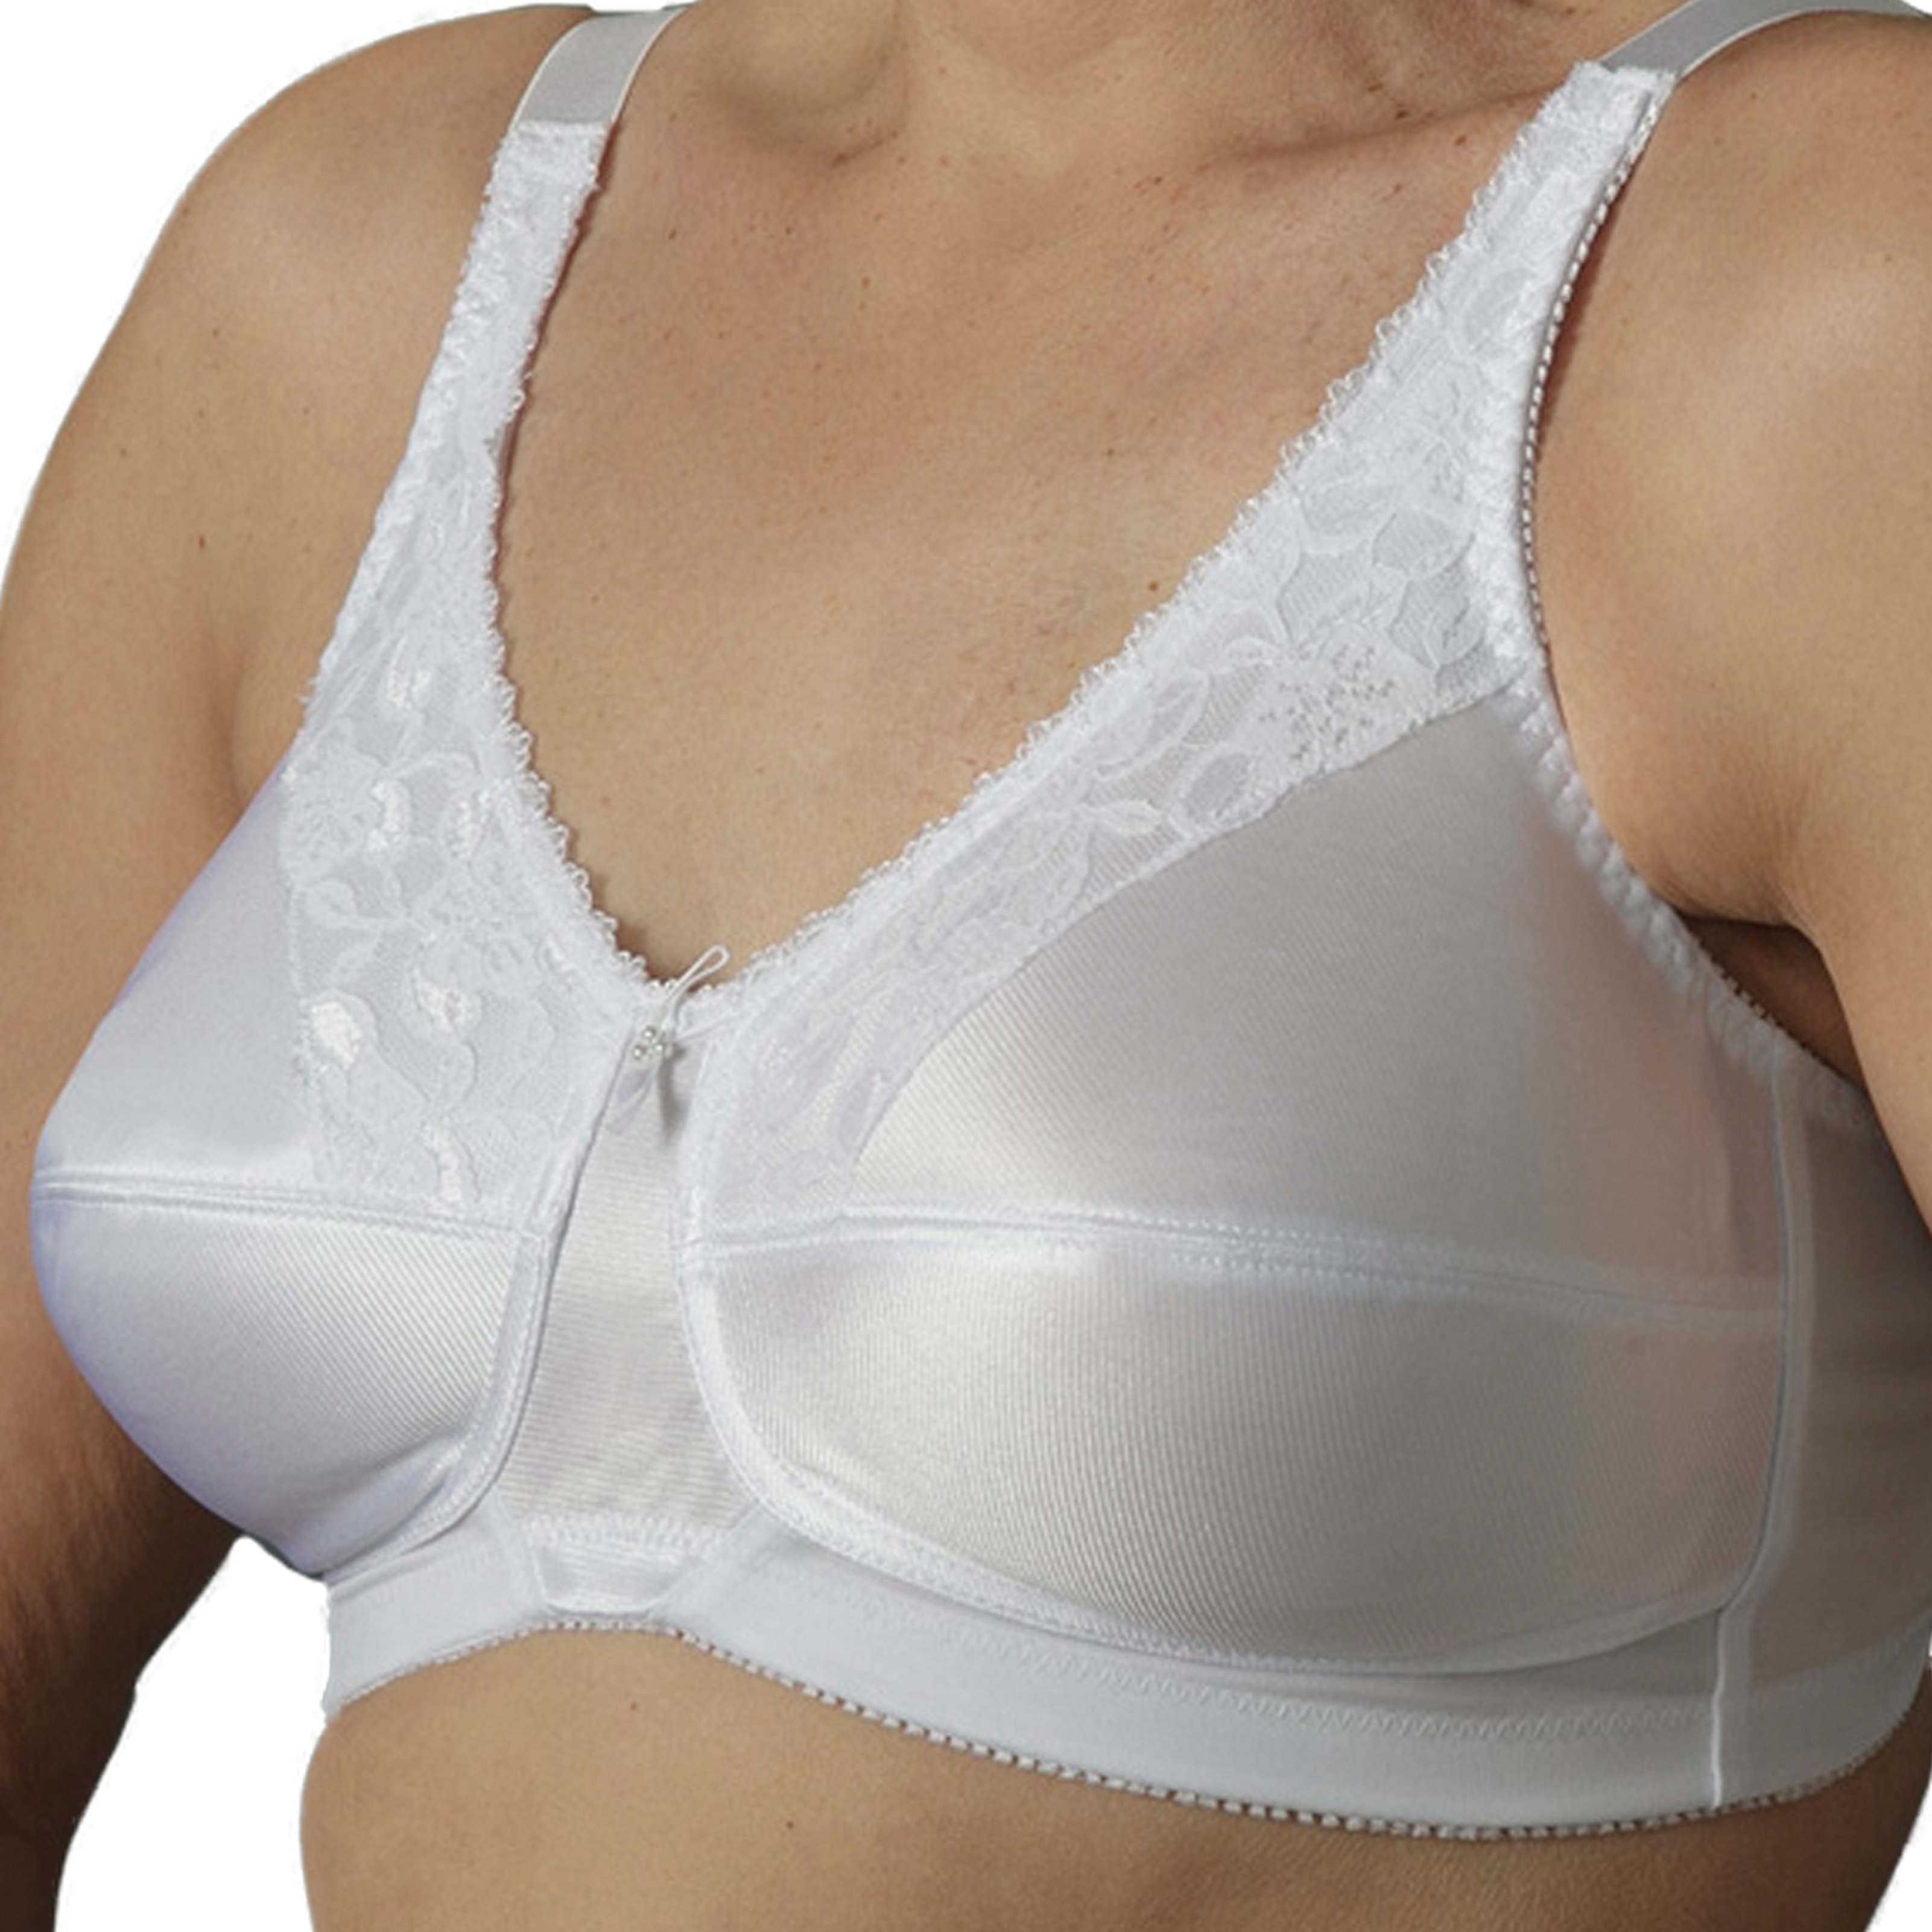 Nearly Me 670 Lace Front Closure Mastectomy Bra